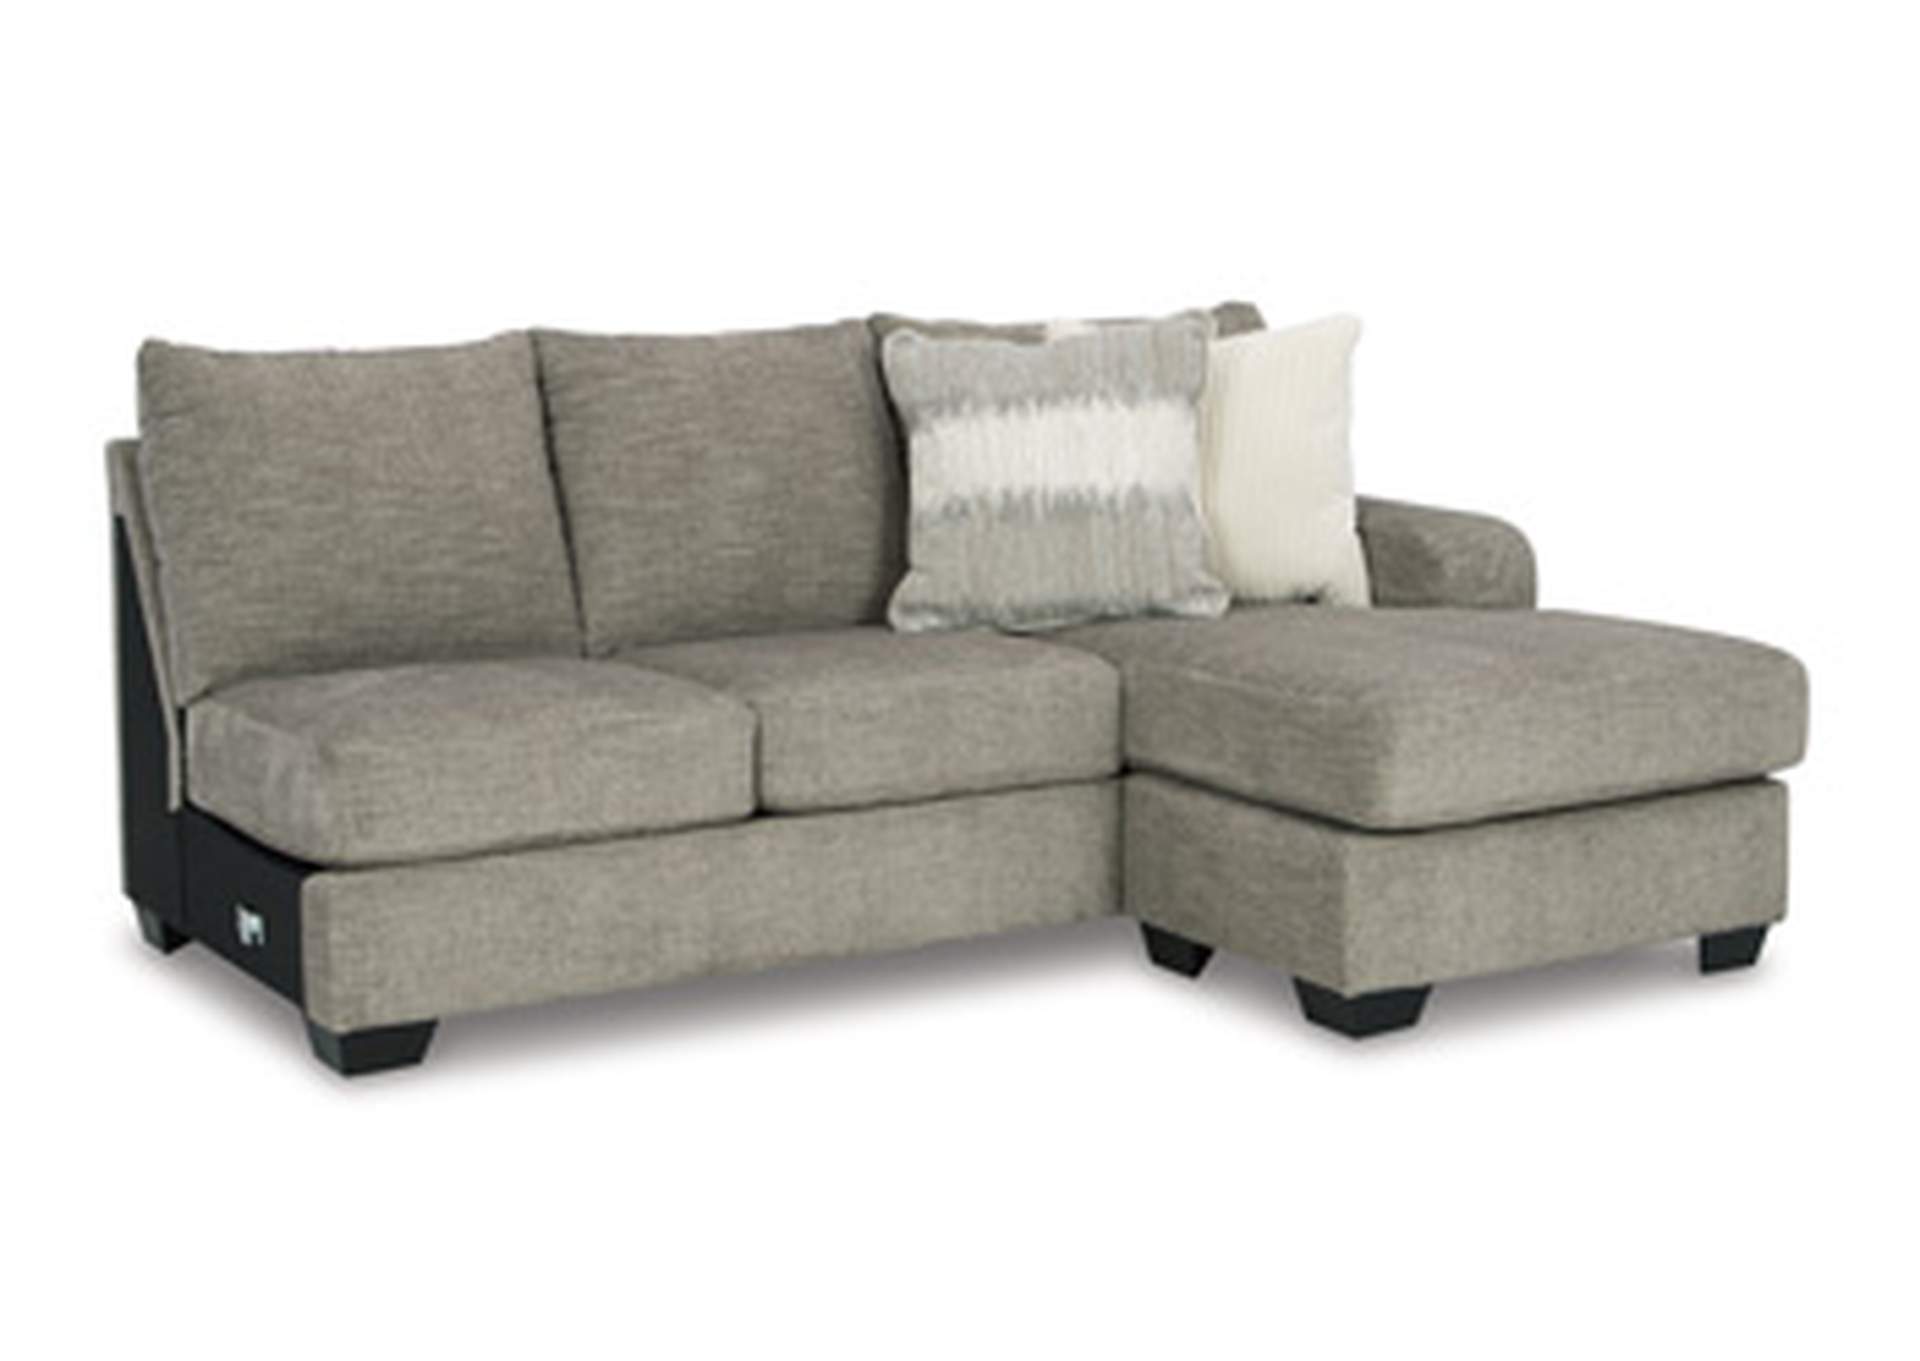 Creswell Right-Arm Facing Sofa Chaise,Signature Design By Ashley